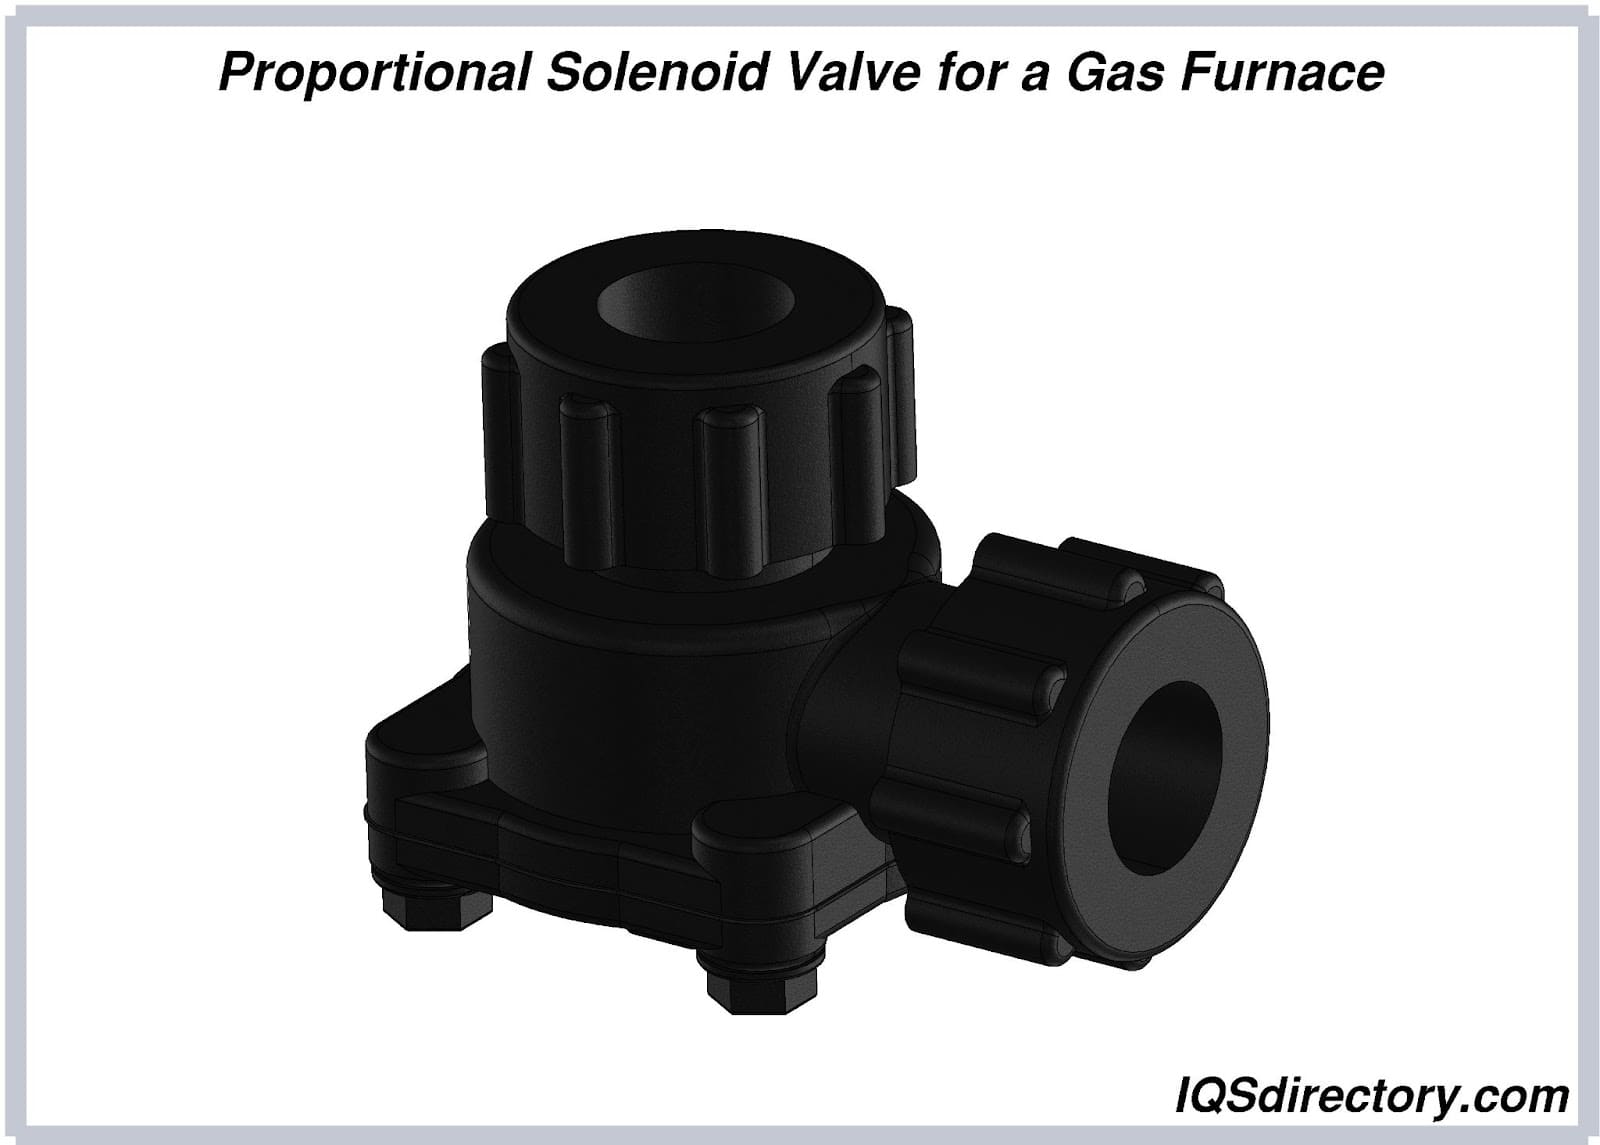 Proportional Solenoid Valve for a Gas Furnace